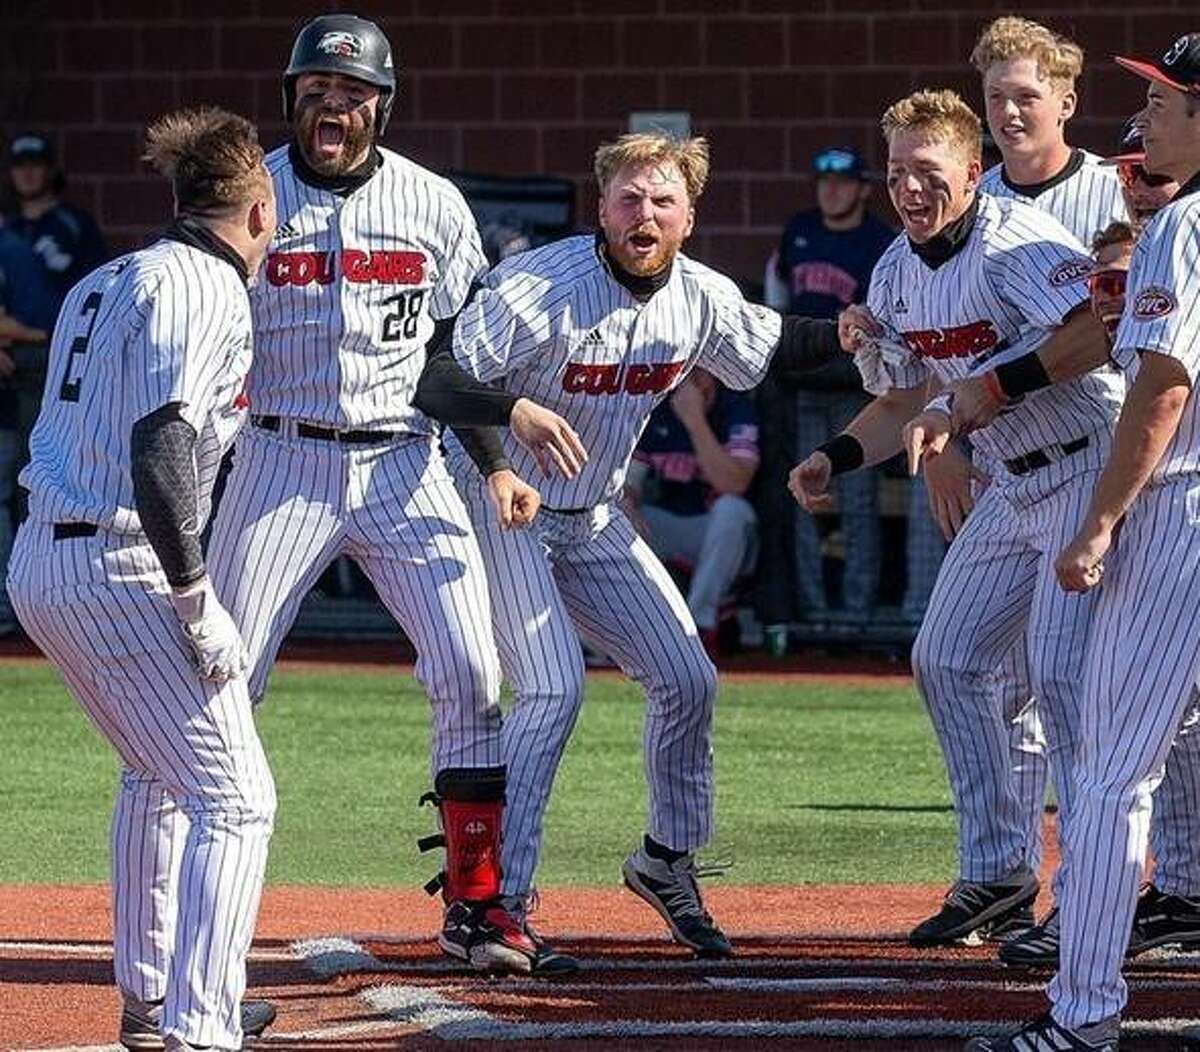 SIUE’s Brady Bunten, center, gets set to touch home after his walk-off homer in the 10th inning of the first game of a doubleheader sweep of UT Martin Friday at SIUE.